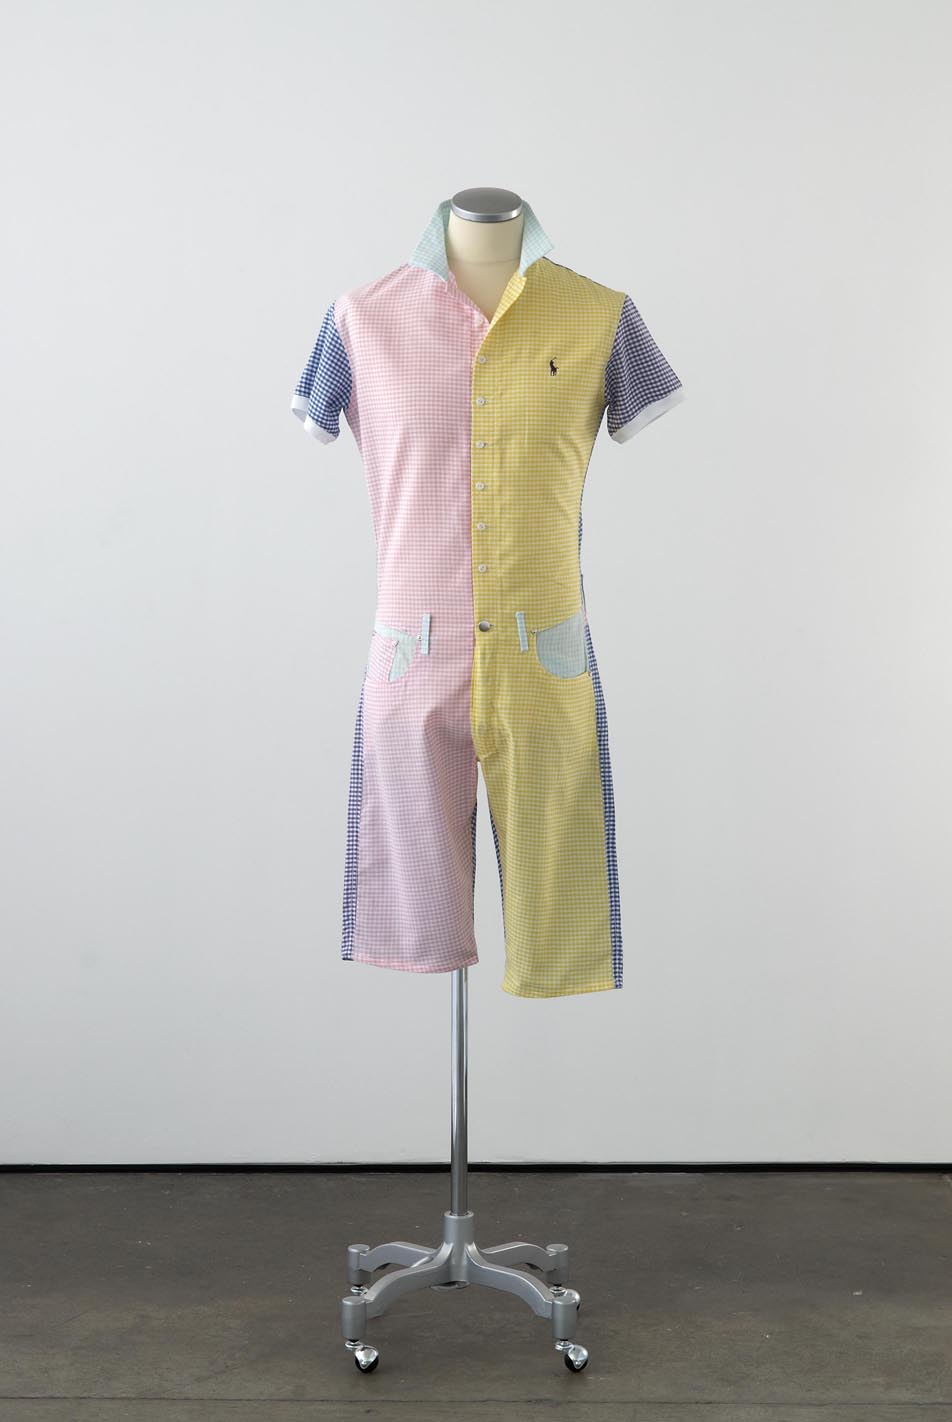     Matthew Darbyshire Standardised Production Clothing, Version 5 2009 Gingham cotton, cotton jersey &amp; fittings on mannequin 185 x 45 x 34 cm 